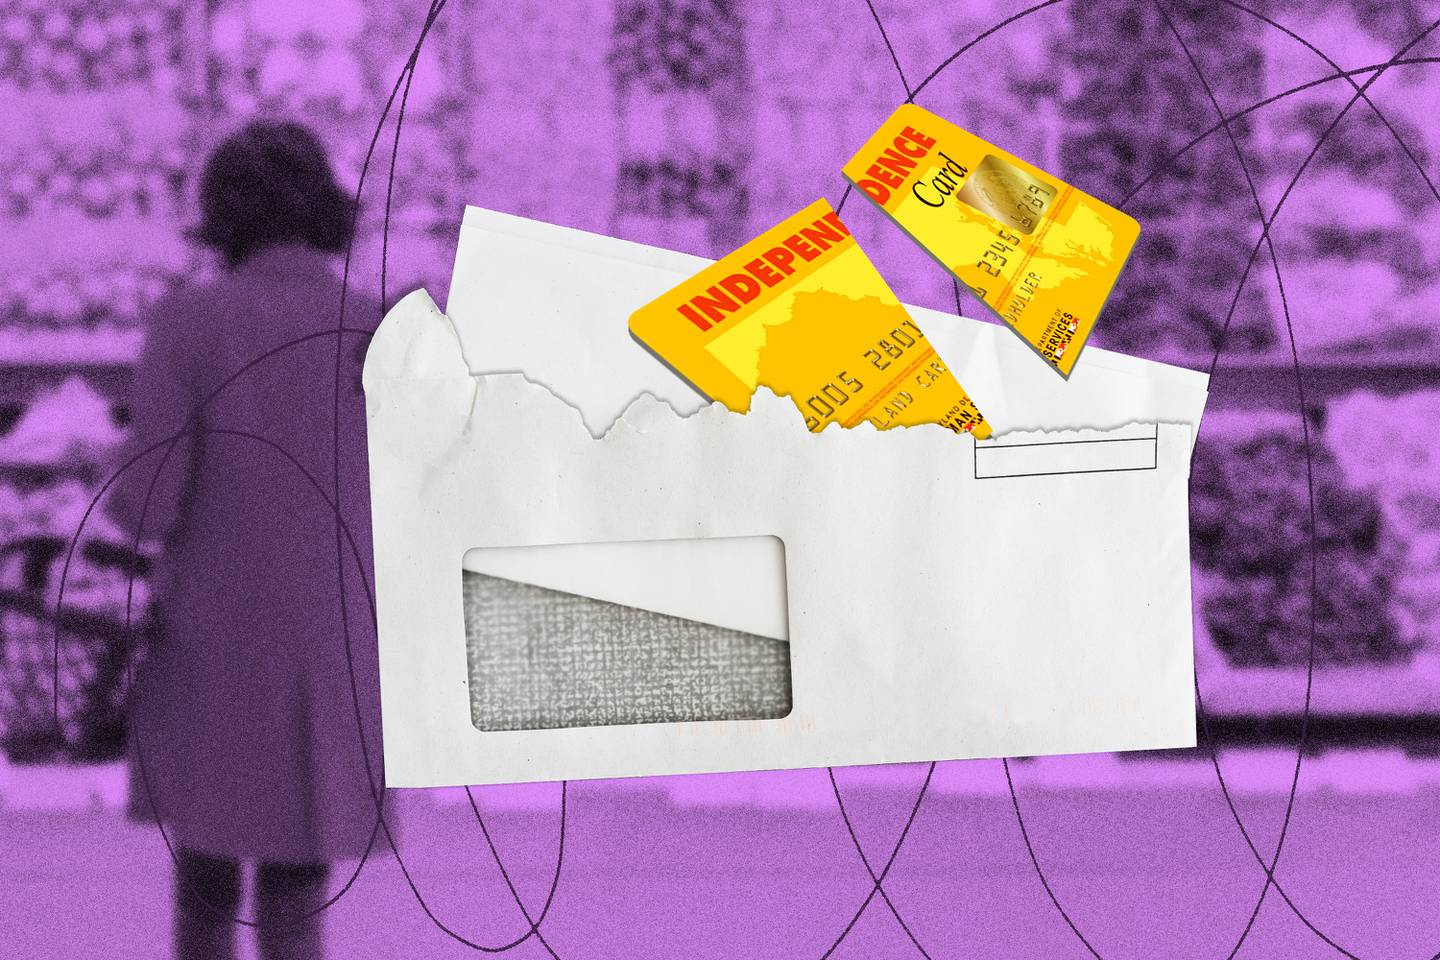 Photo illustration shows EBT benefits card, cut into two pieces, emerging from torn-open business envelope. In the background is a blurry image of a woman standing in front of produce aisle holding an empty shopping basket, her back to us.